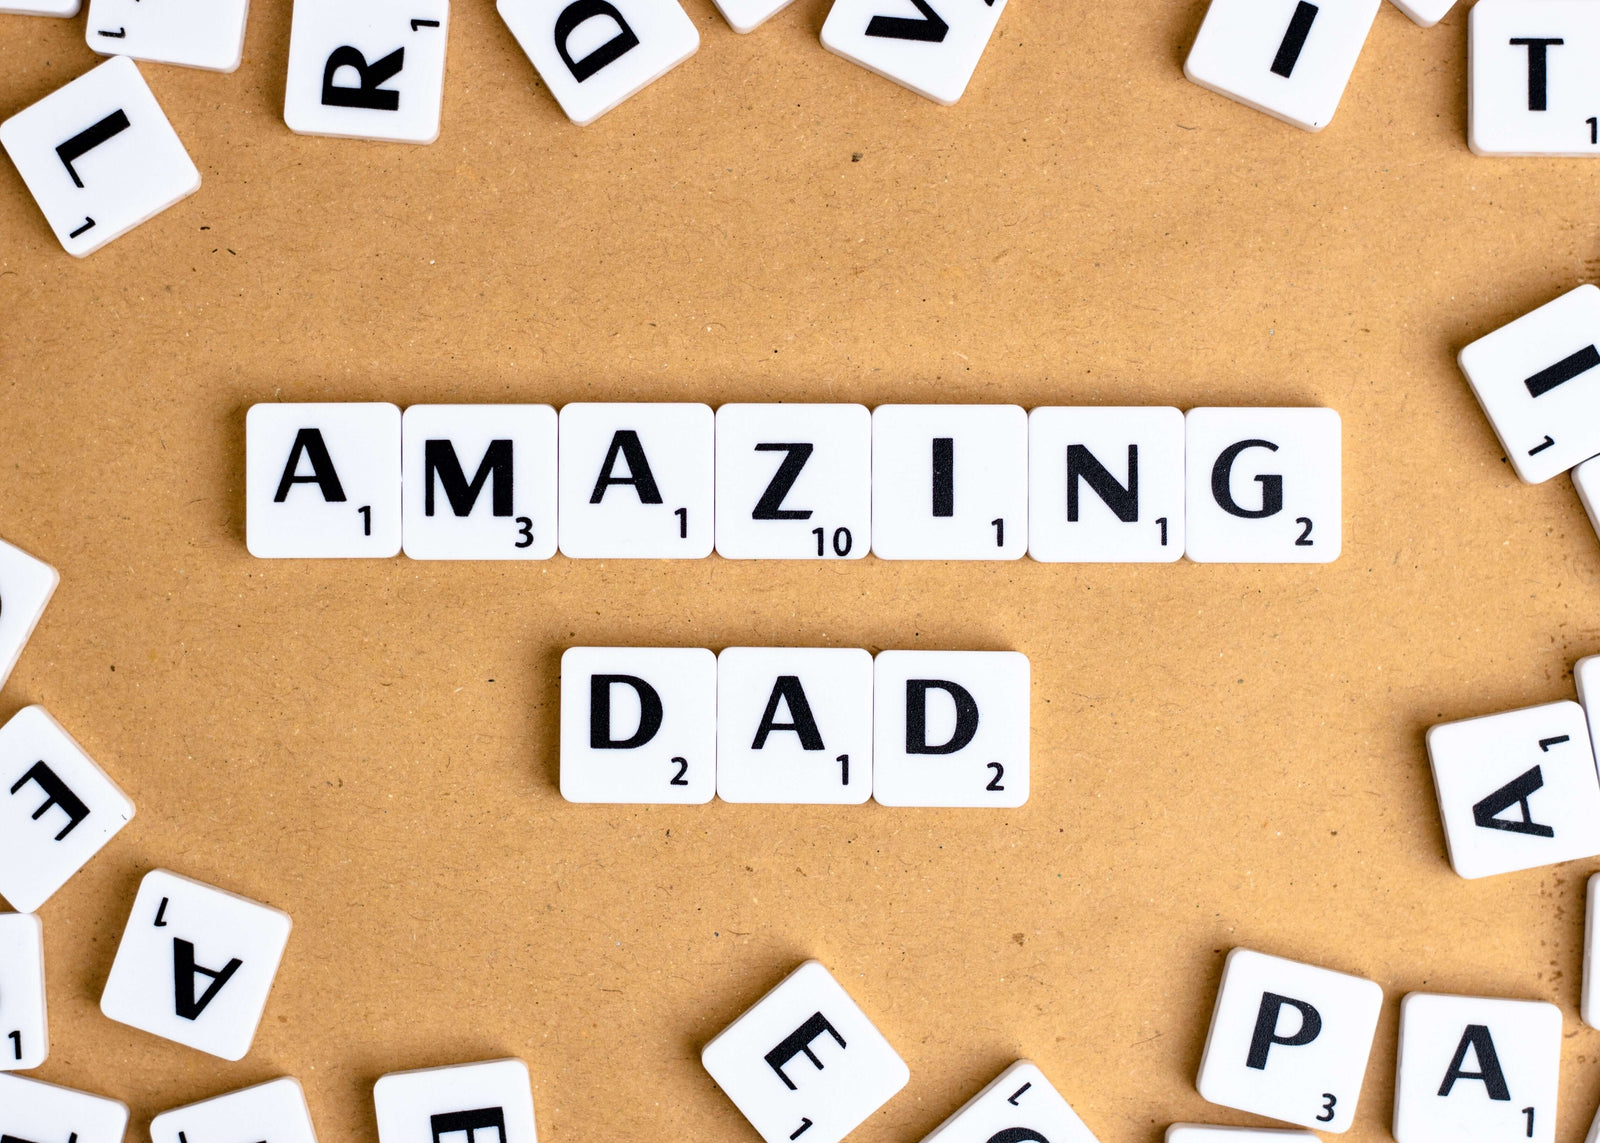 23 Incredible Father's Day DIY Gift Ideas - Best Father's Day DIY Gifts